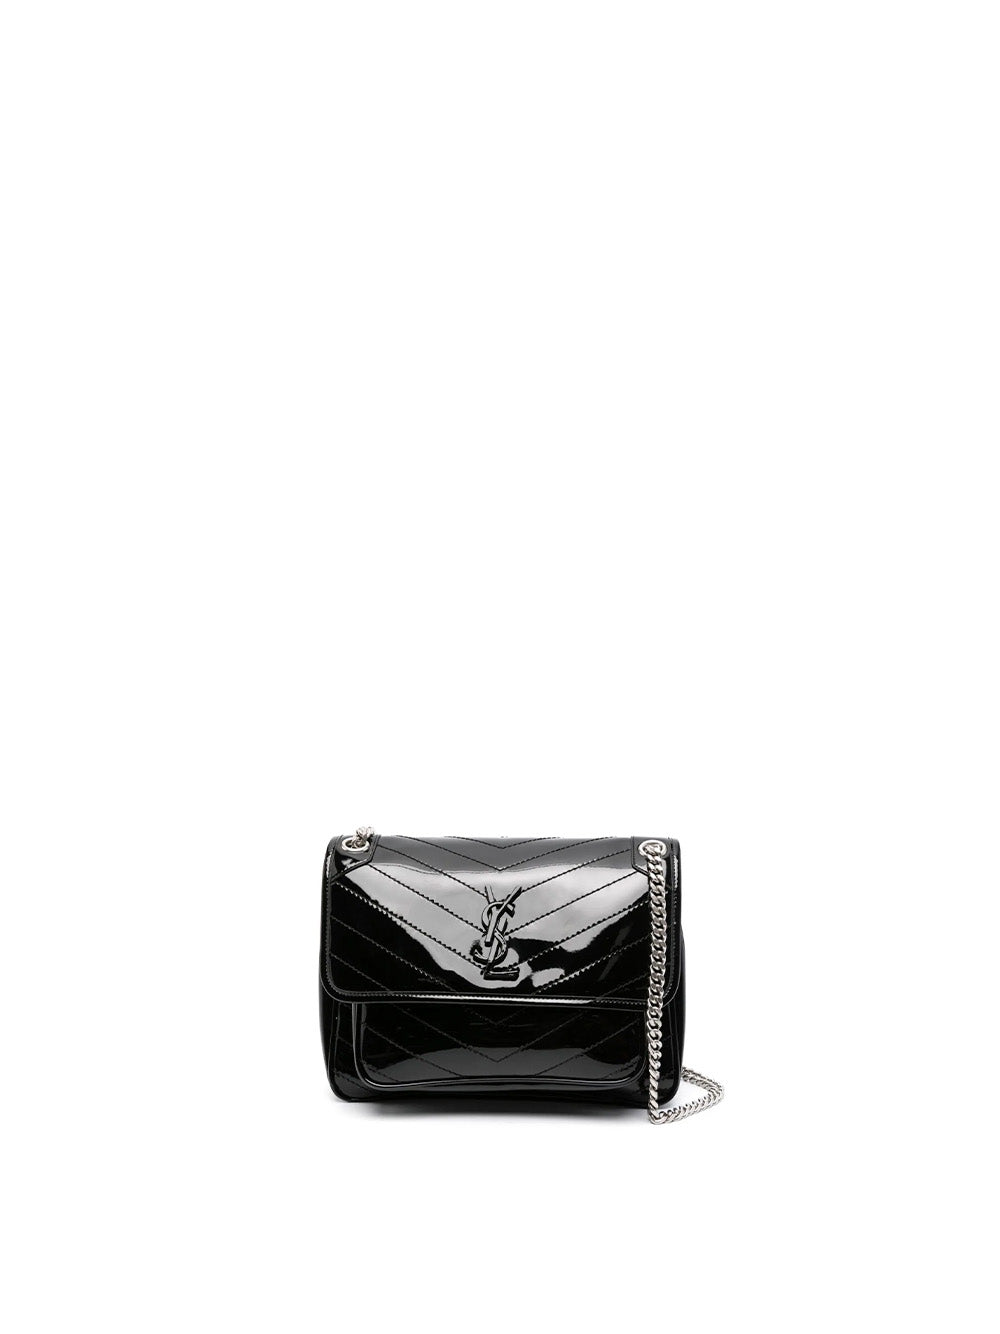 Patent leather satchel Coach White in Patent leather - 27659142